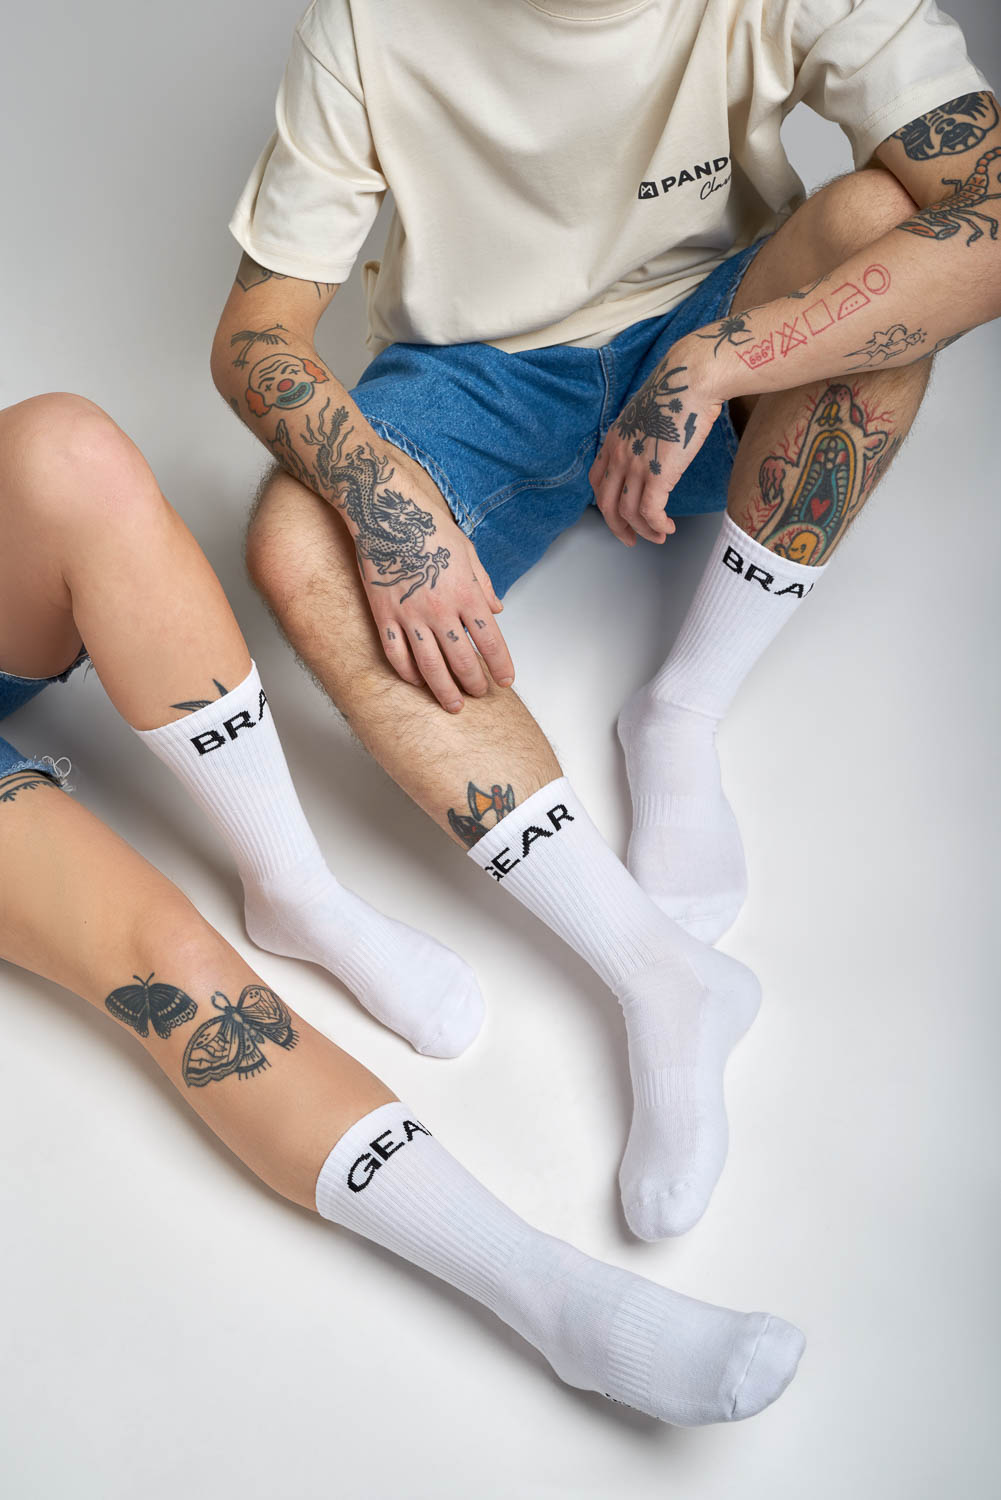 Woman&#39;s and man&#39;s legs wearing white socks with &quot;break&quot; and &quot;gear&quot;